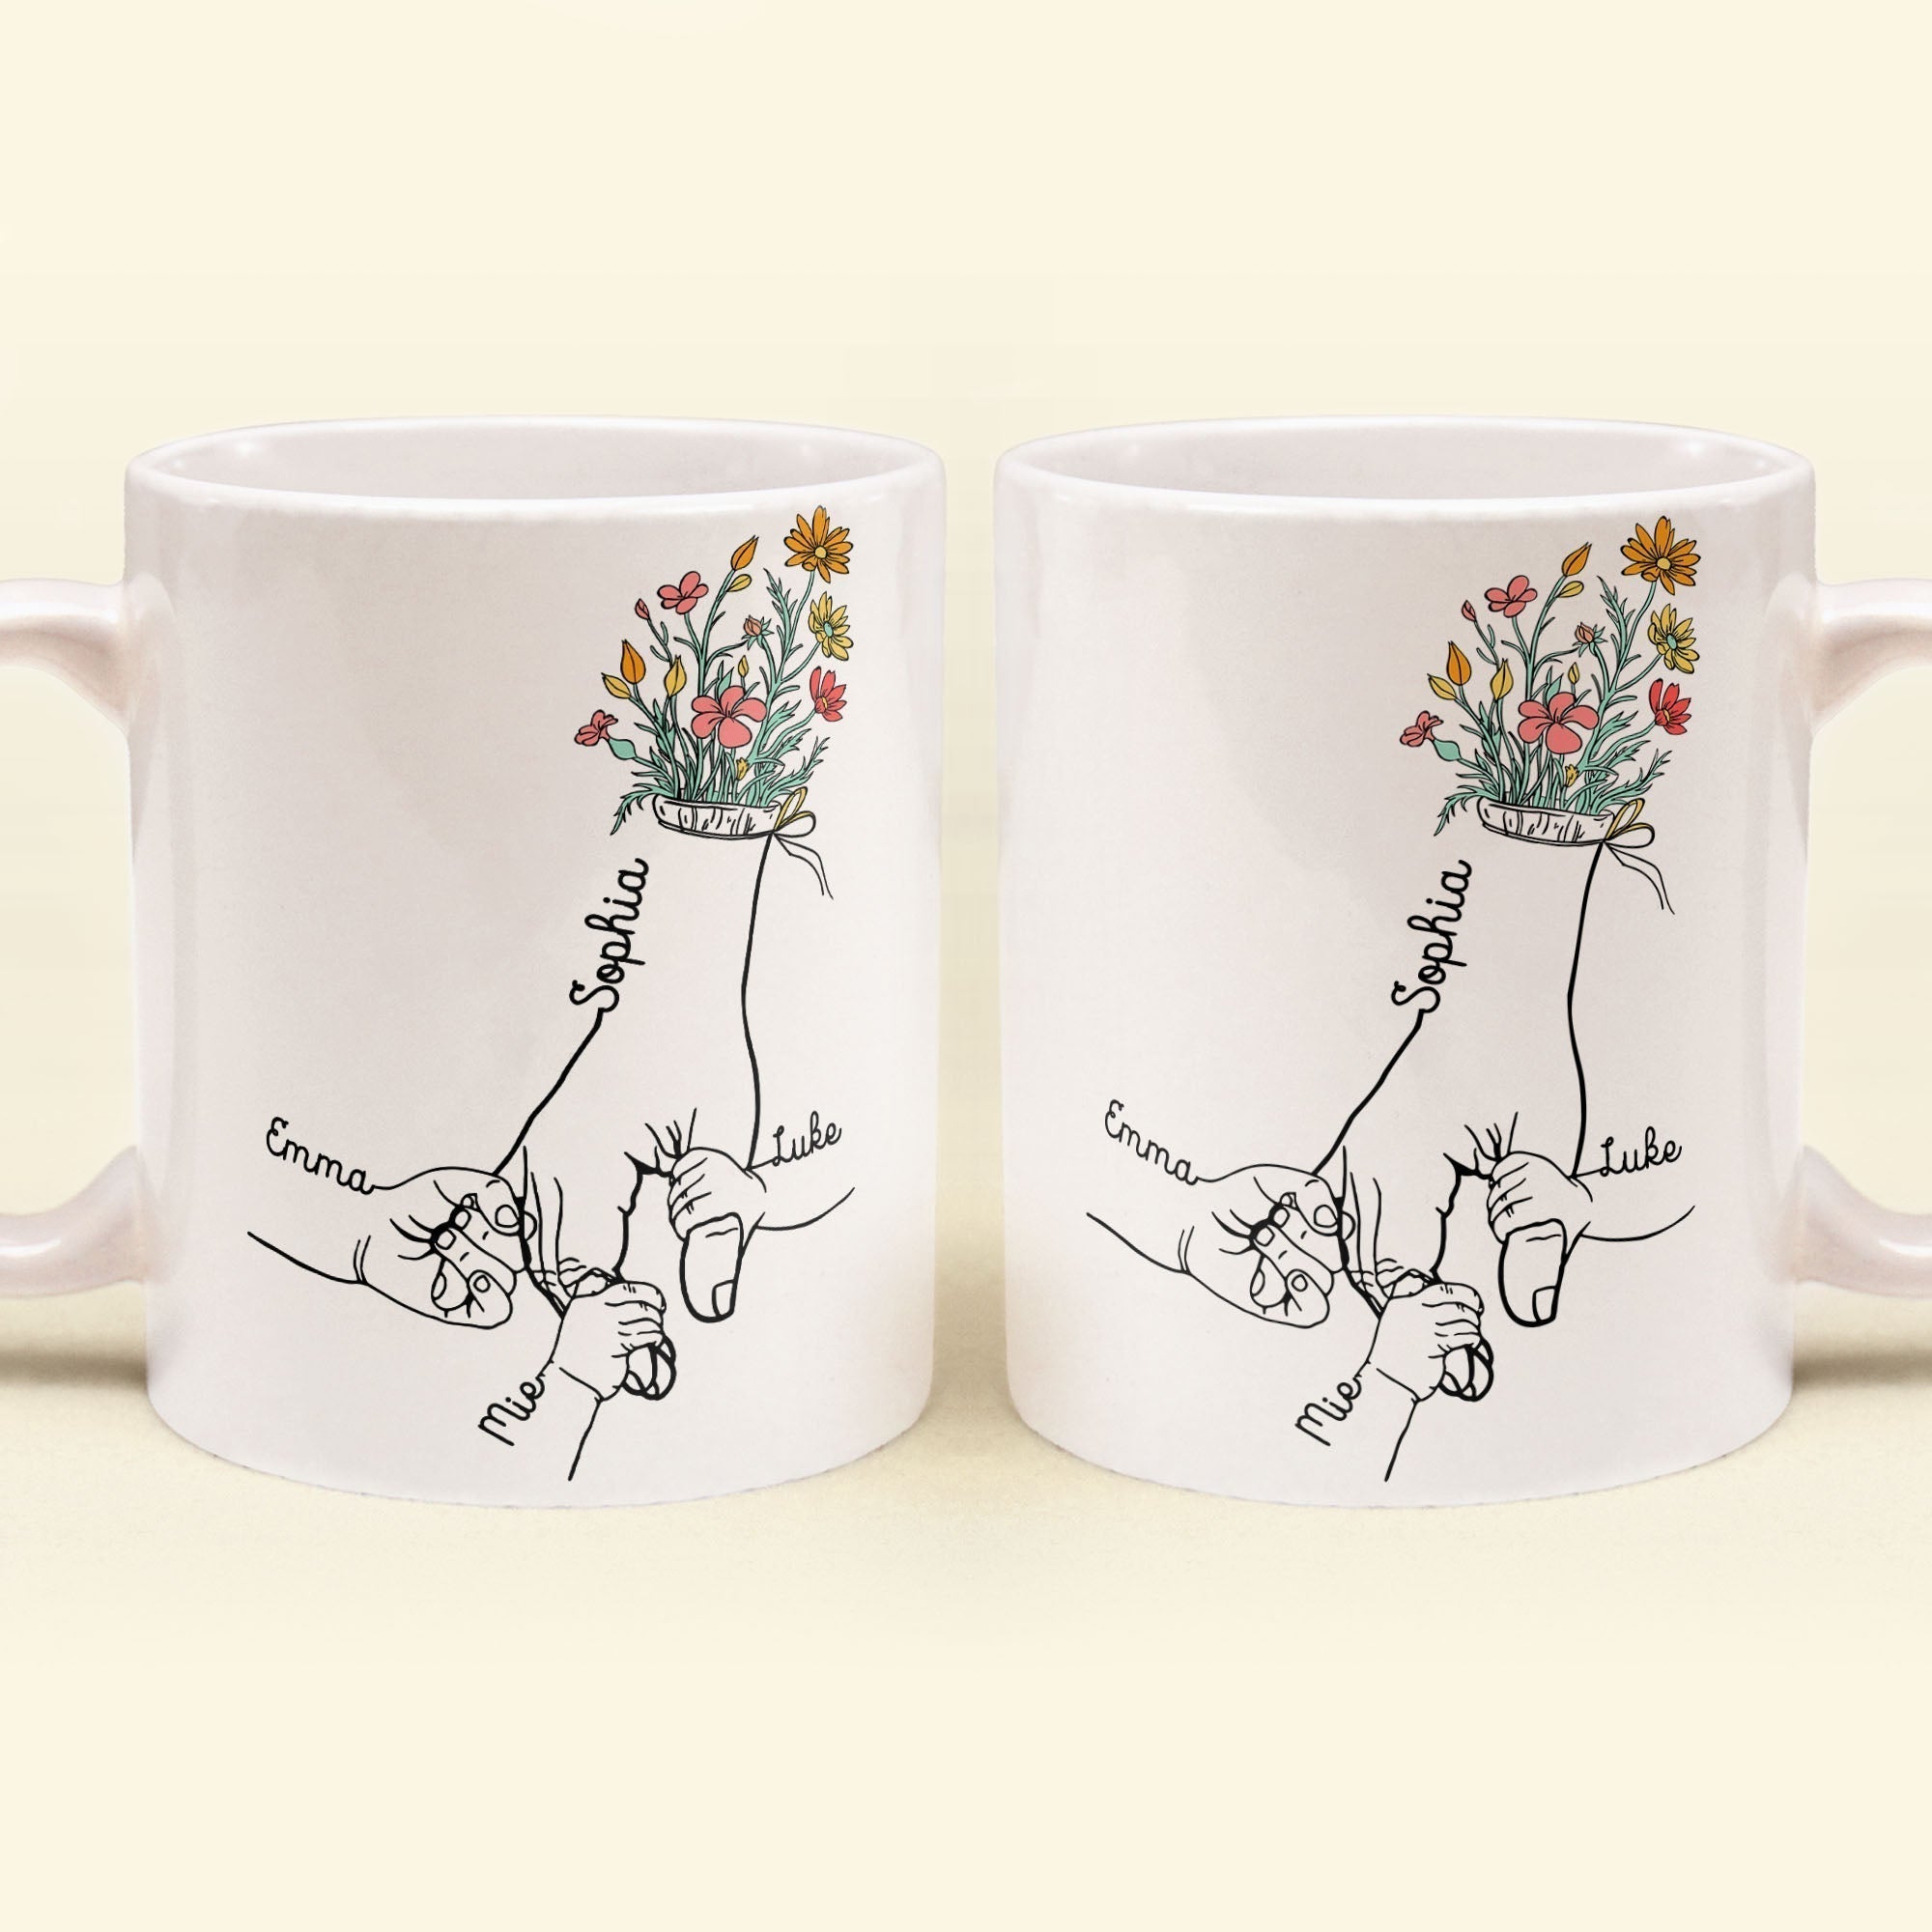 Holding Mom's/Dad's Hand - Personalized Mug